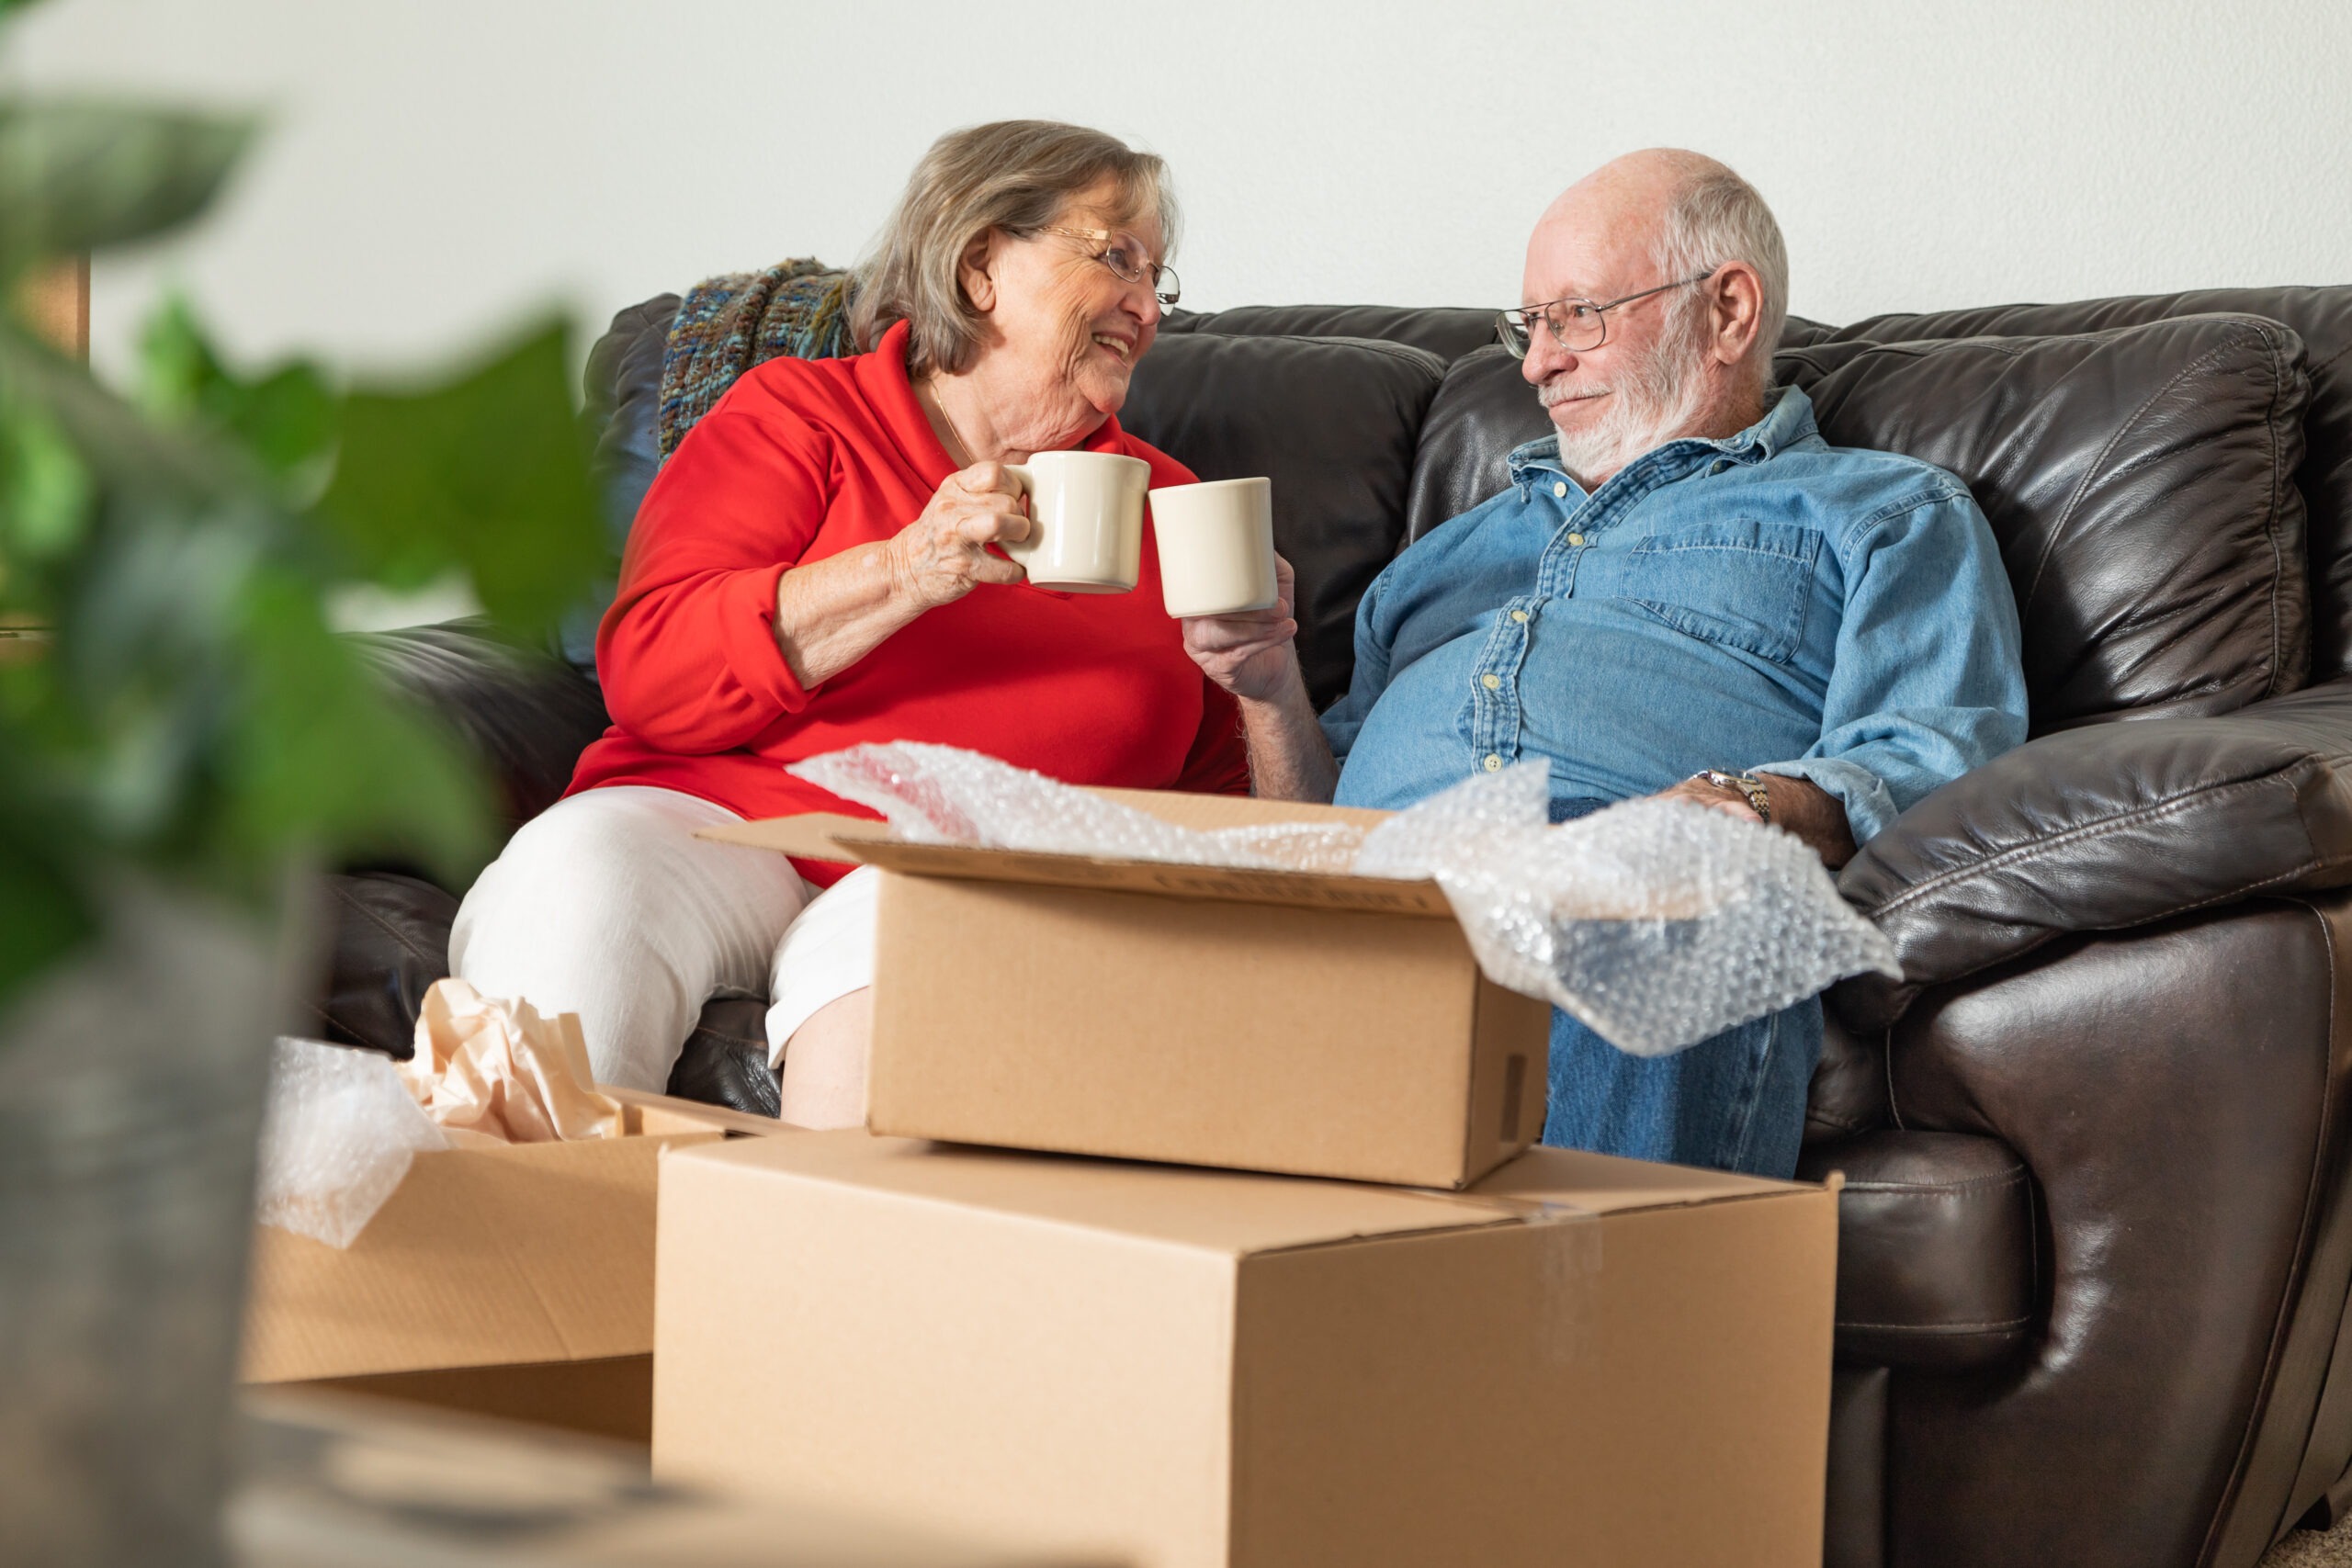 Senior Adult Couple Resting on Couch with Cups of Coffee Surrounded with Free Moving Boxes.